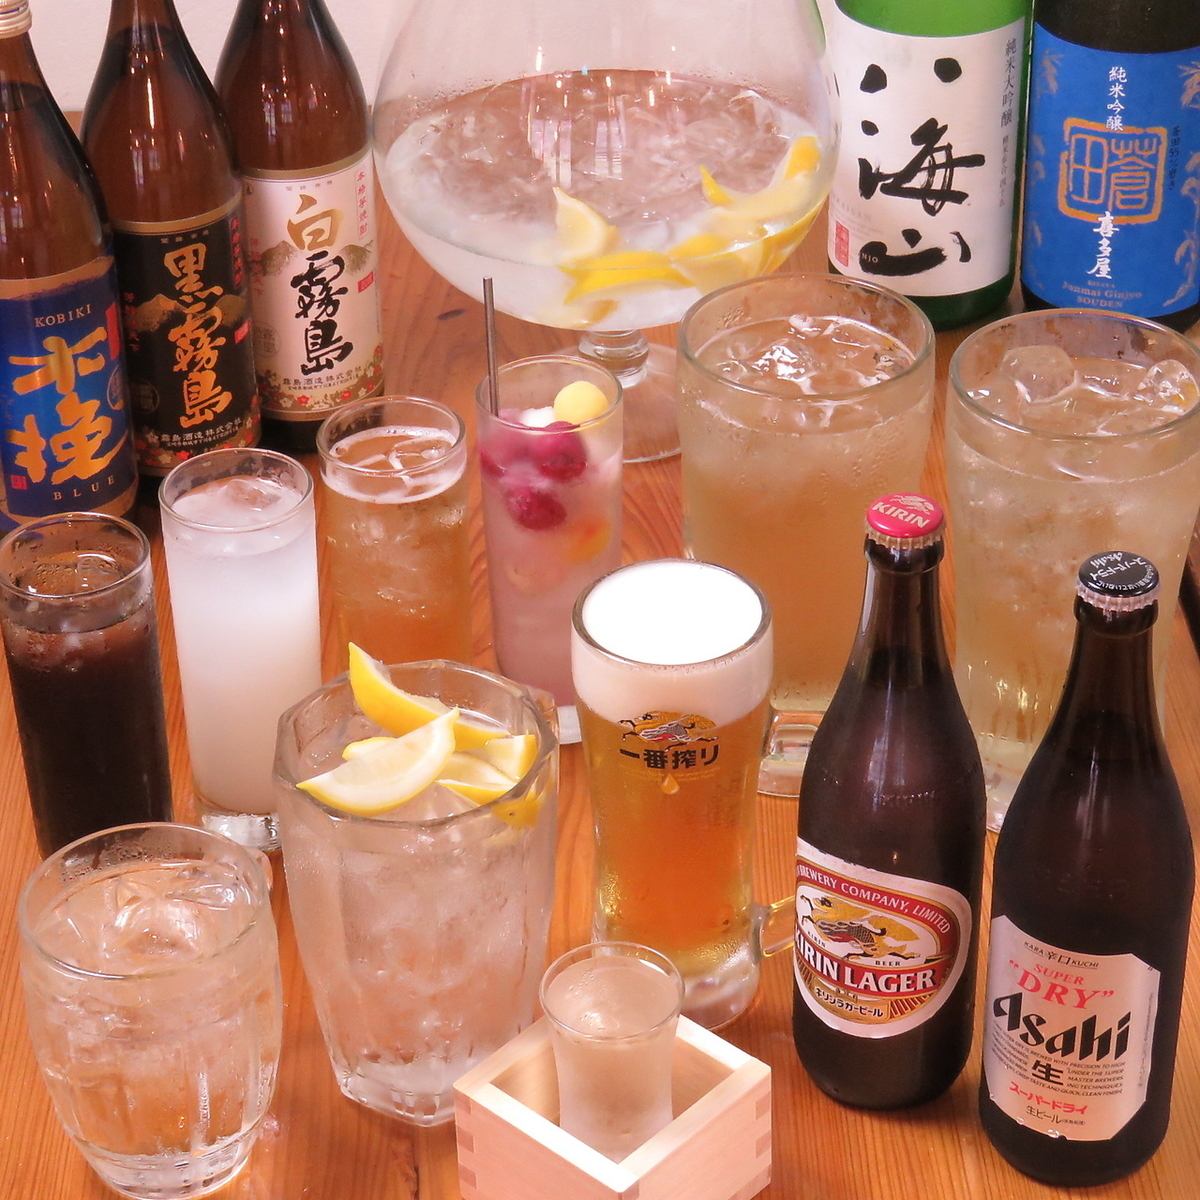 We offer all-you-can-drink items! Beer is also available!